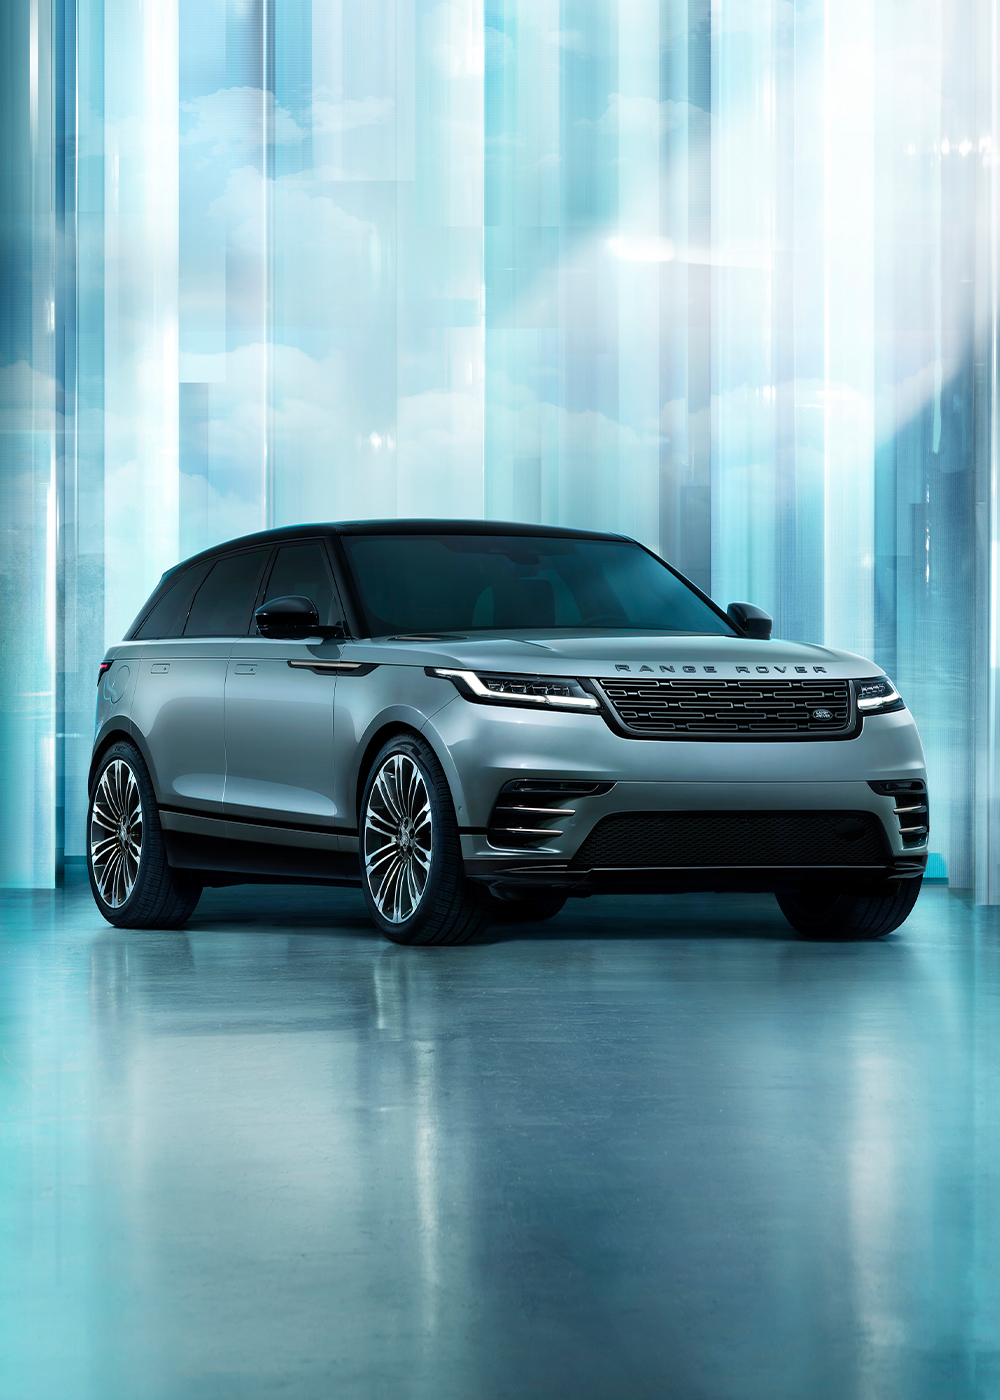 Range rover in blue in a matching blue space-age backdrop